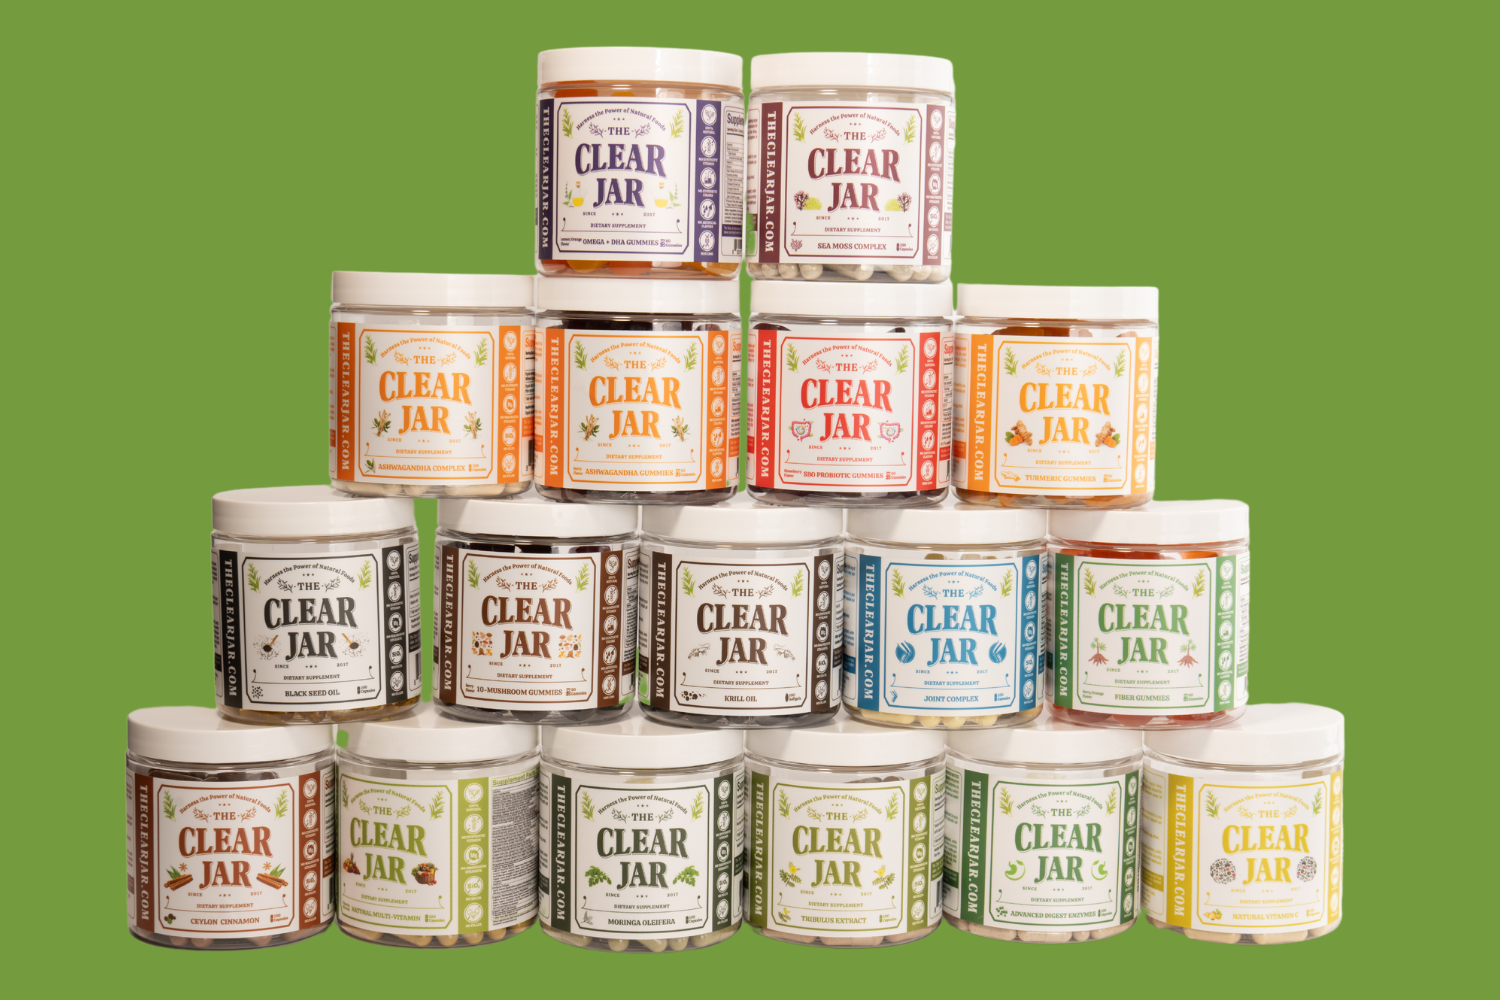 The Clear Jar Products